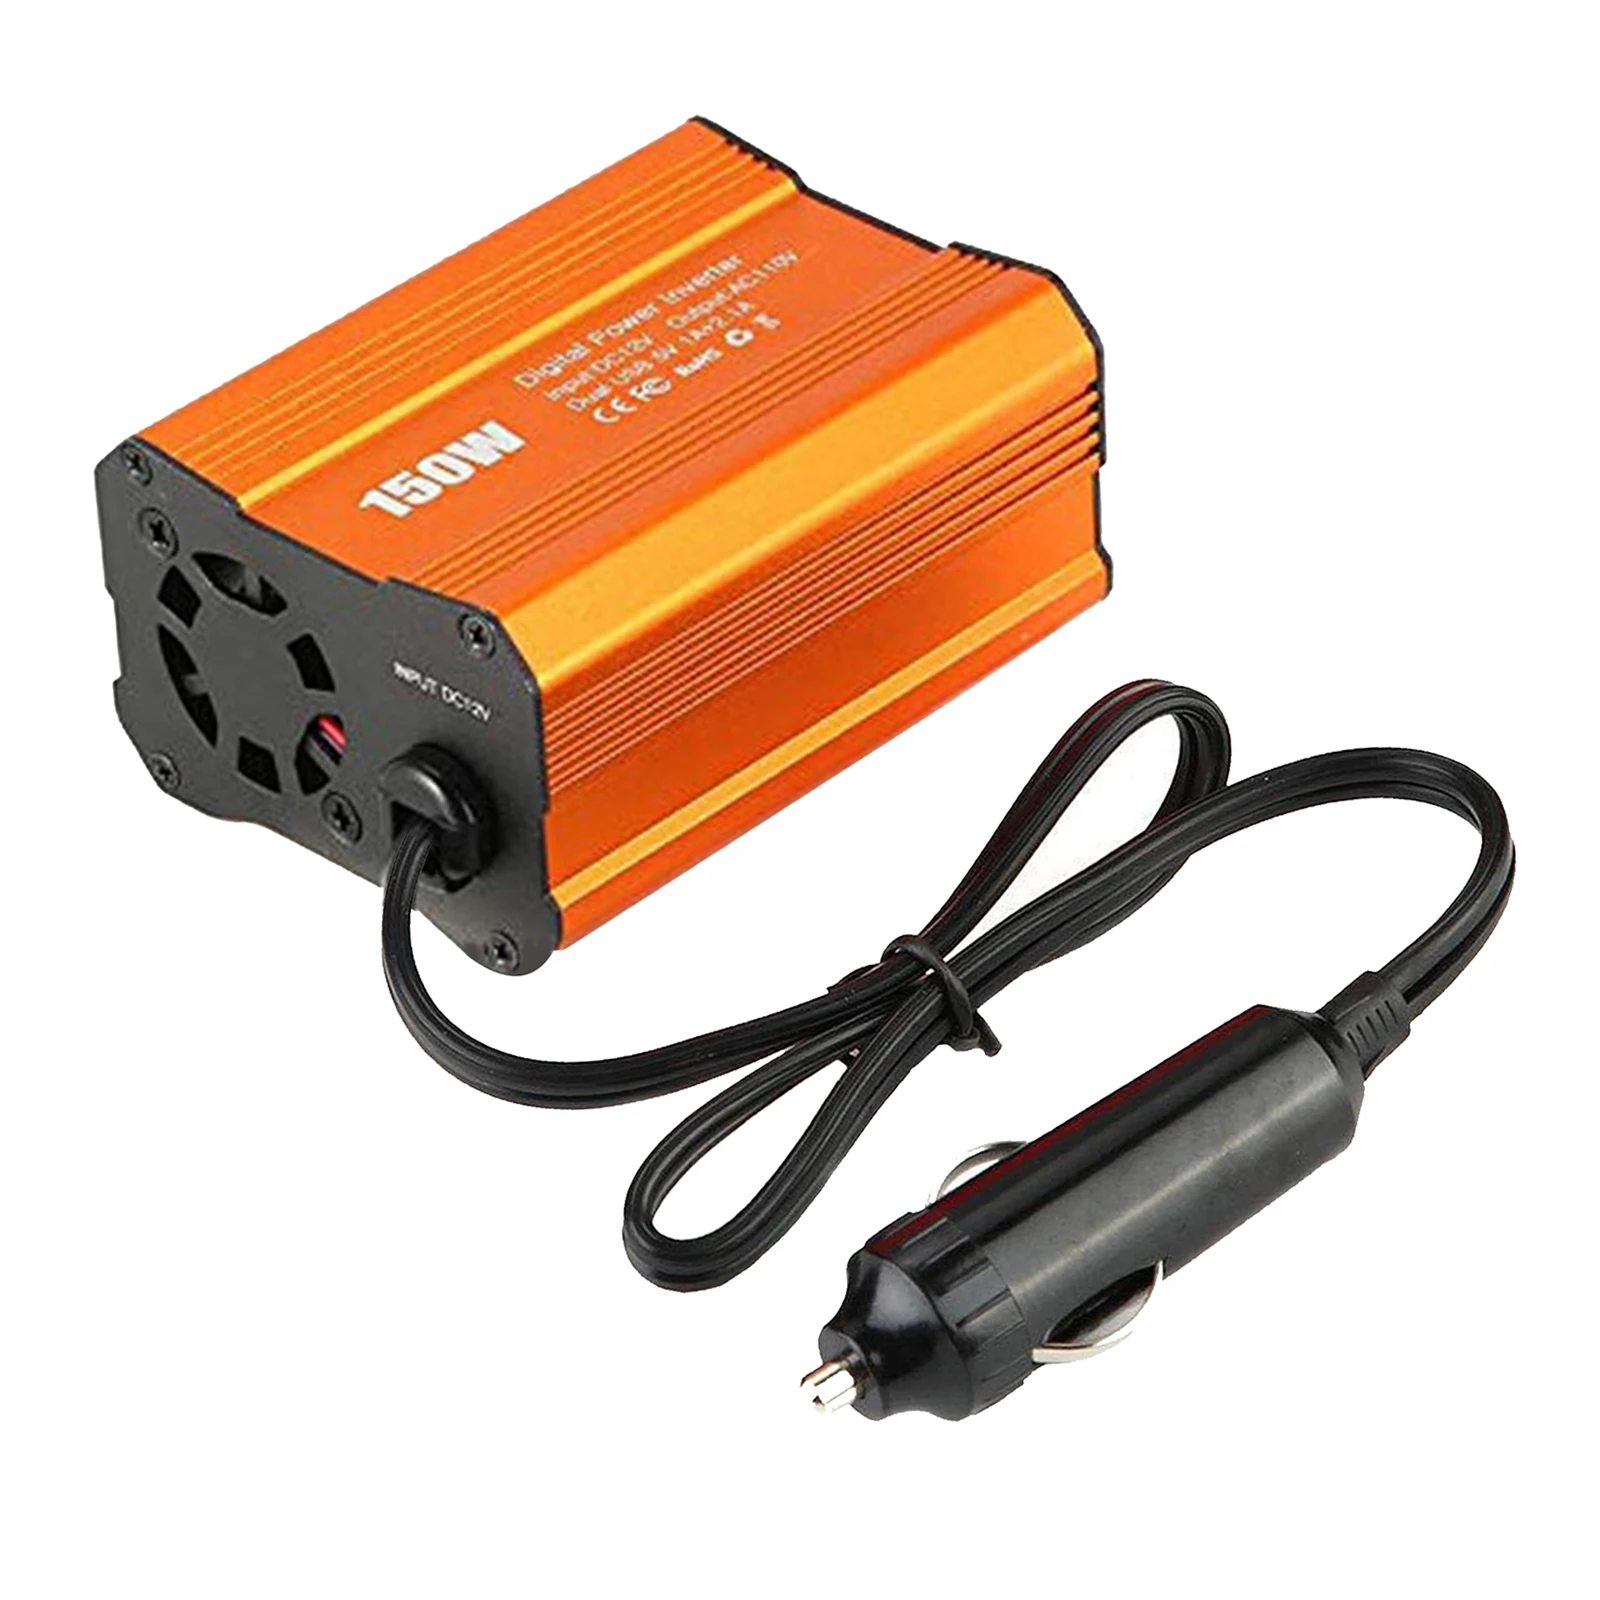 

150W 12V To 110V Converter Car Adapter Power Inverter with Dual USB Charging Ports Safety for Consoles TV Laptops